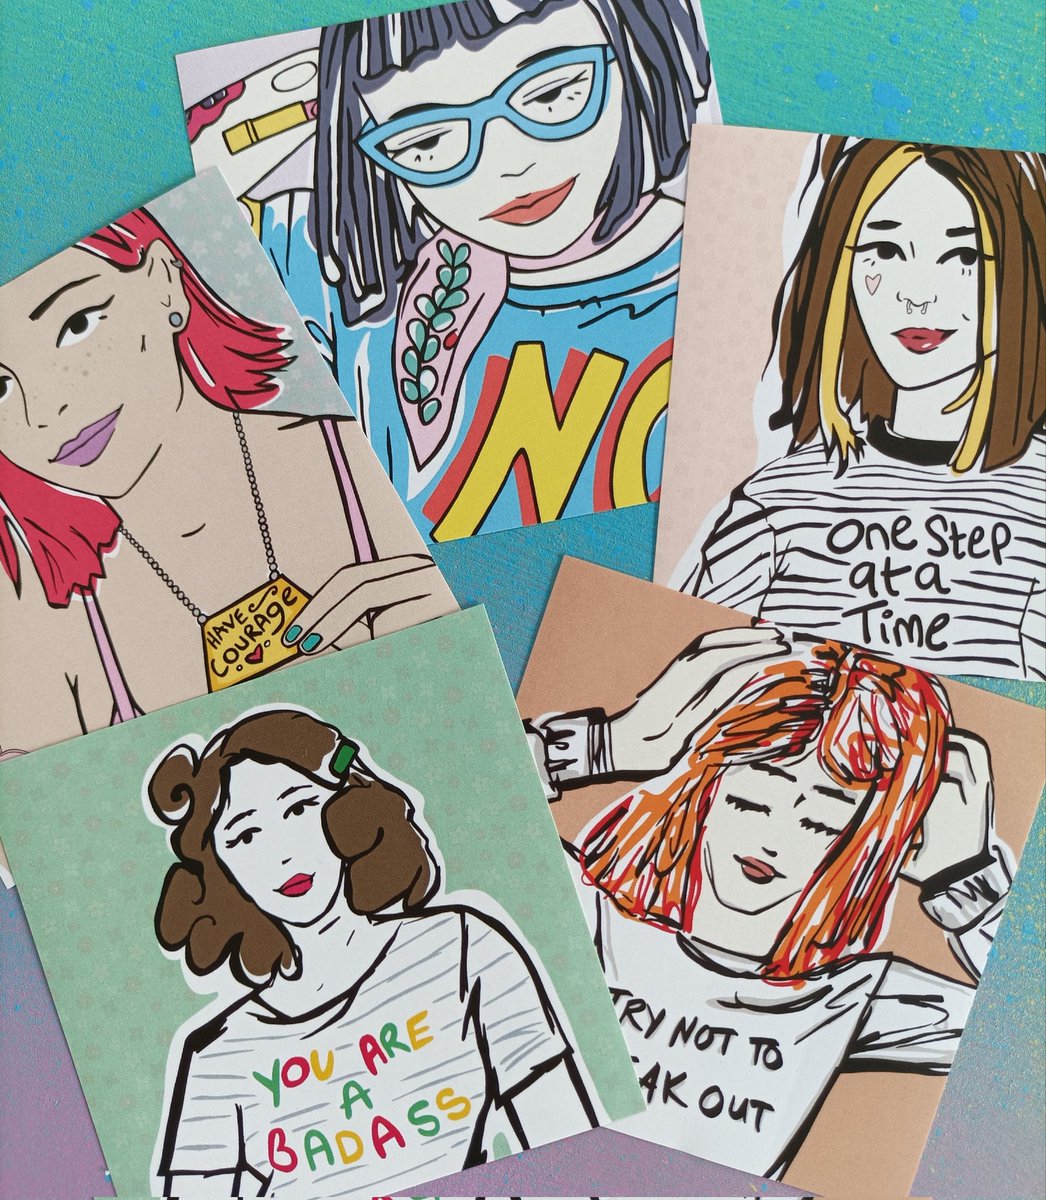 #mondaymotivation ..These ladies are now available as stickers on my #etsy! I'm definitely needing the Try Not To Freak Out one today...I don't know where the weeks are going!! 😅..

#MondayMotivation #Mondaymorning #mondaythoughts #anothermonday #Mondaymorning #ArtistOnTwitter